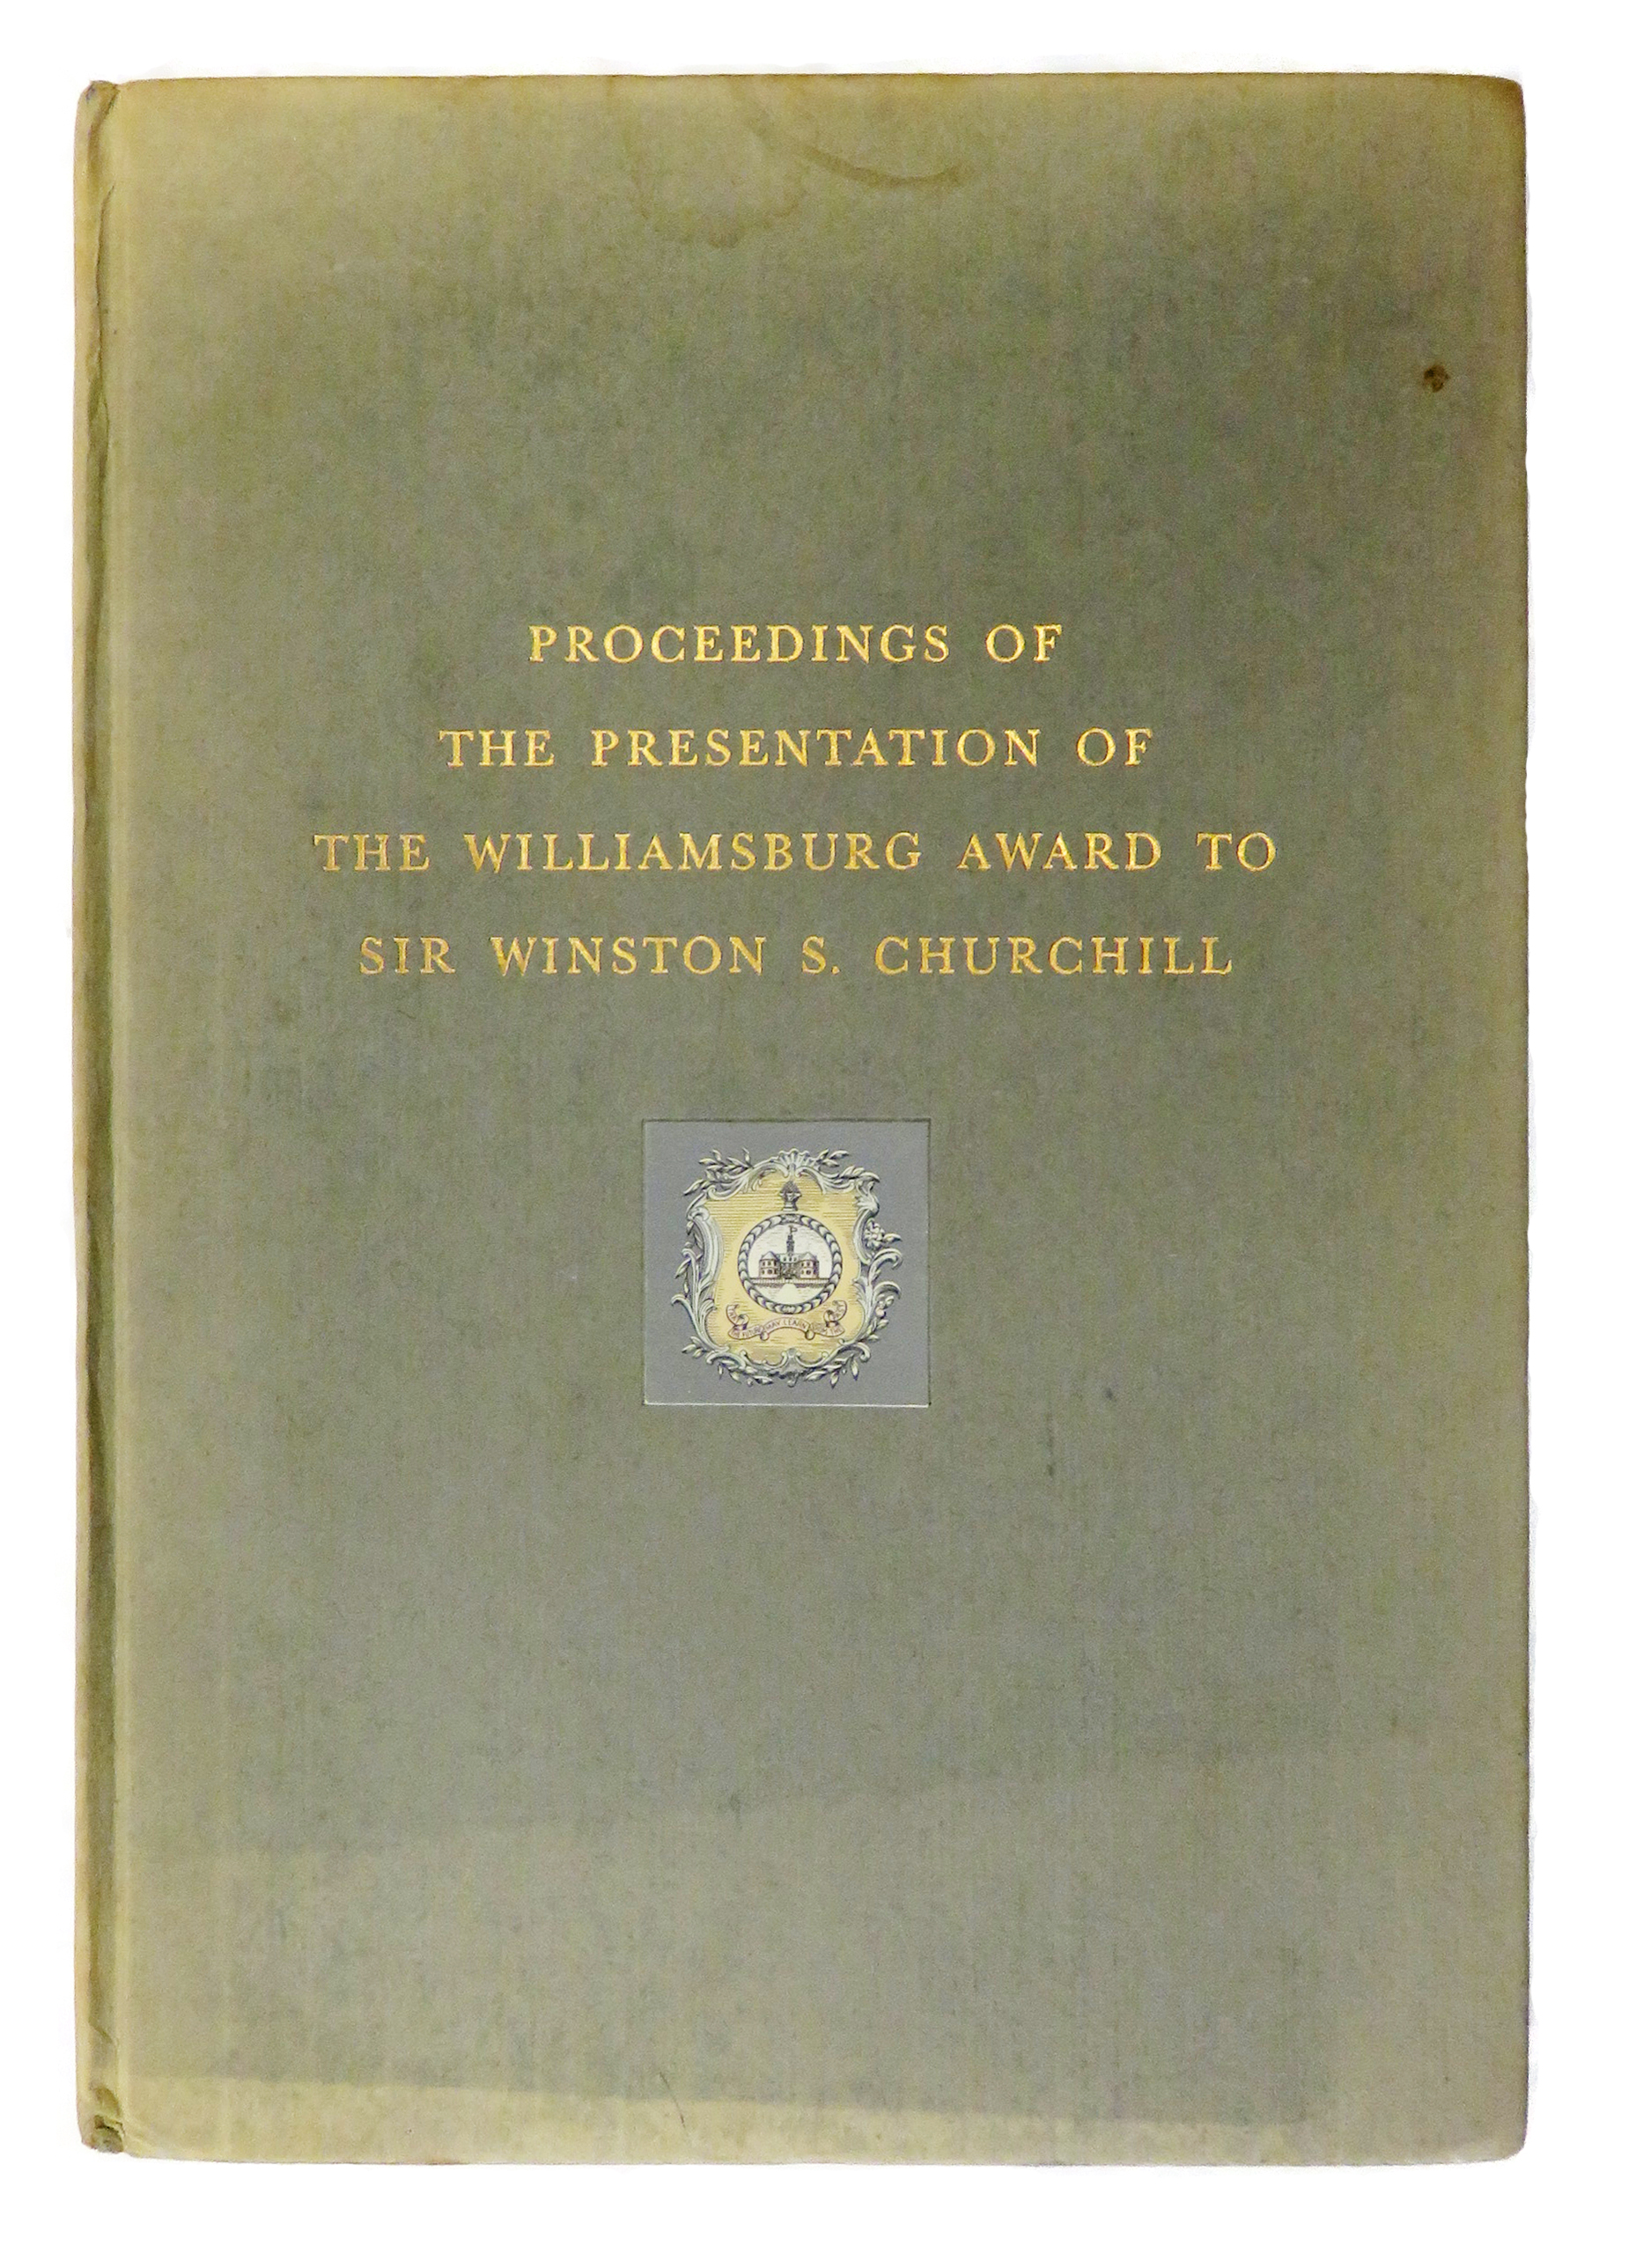 Proceedings of the Presentation of The Williamsburg Award... to The Rt. Hon. Sir Winston S. Churchill... SIGNED by Lady Mary Soames